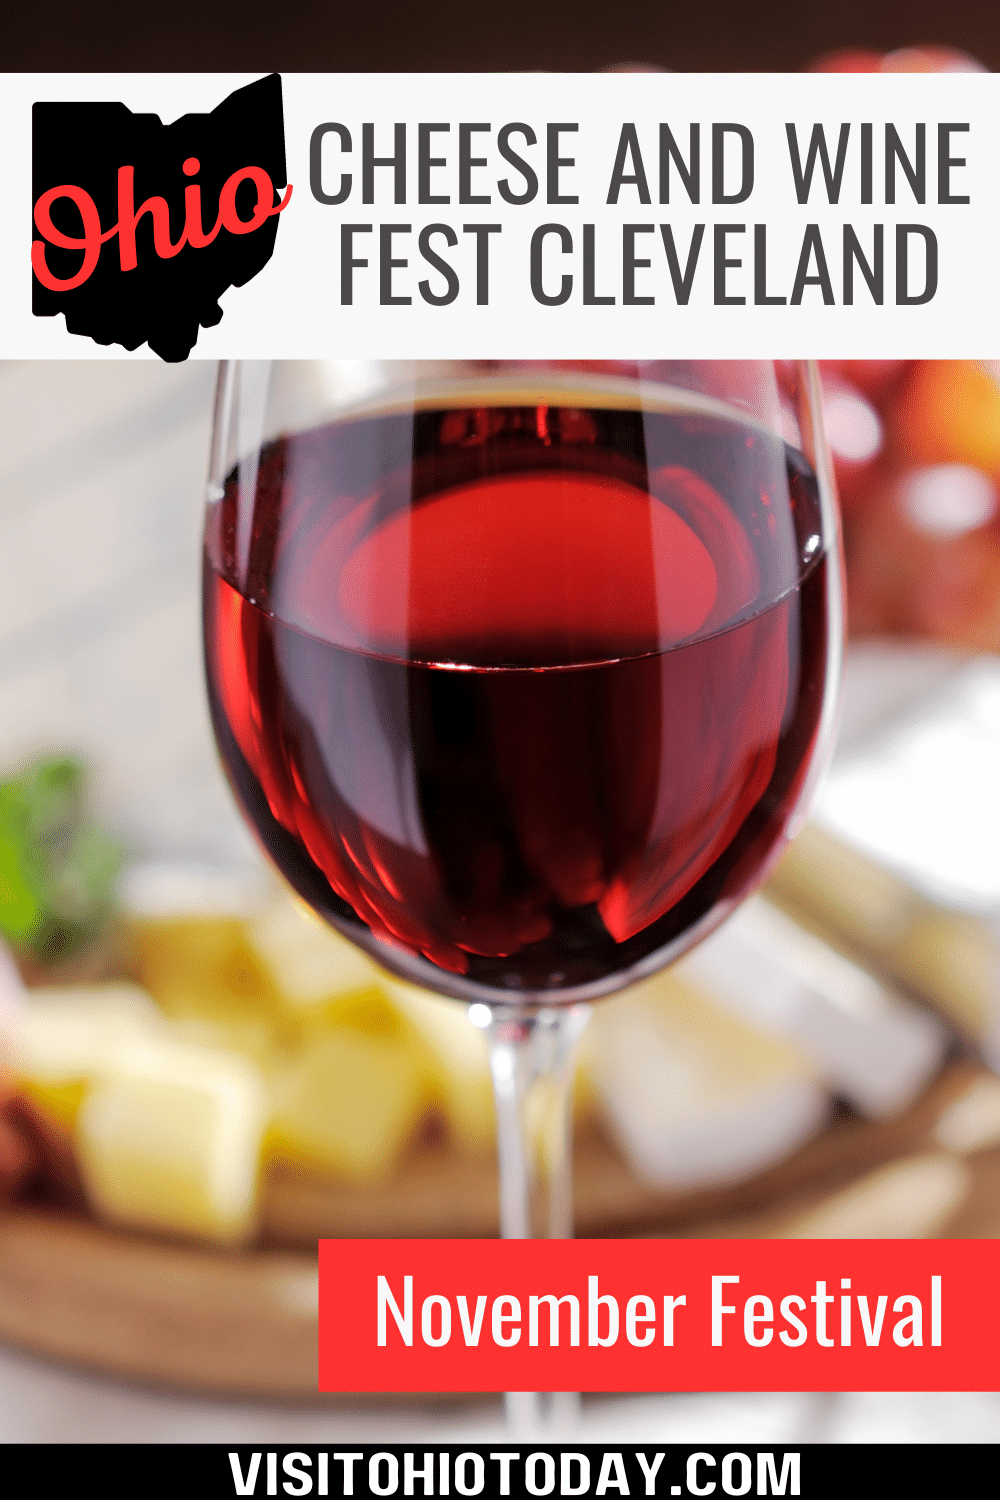 The Cheese and Wine Fest Cleveland is held in mid November each year. The festival showcases different kinds of cheese and wine from all over the world.